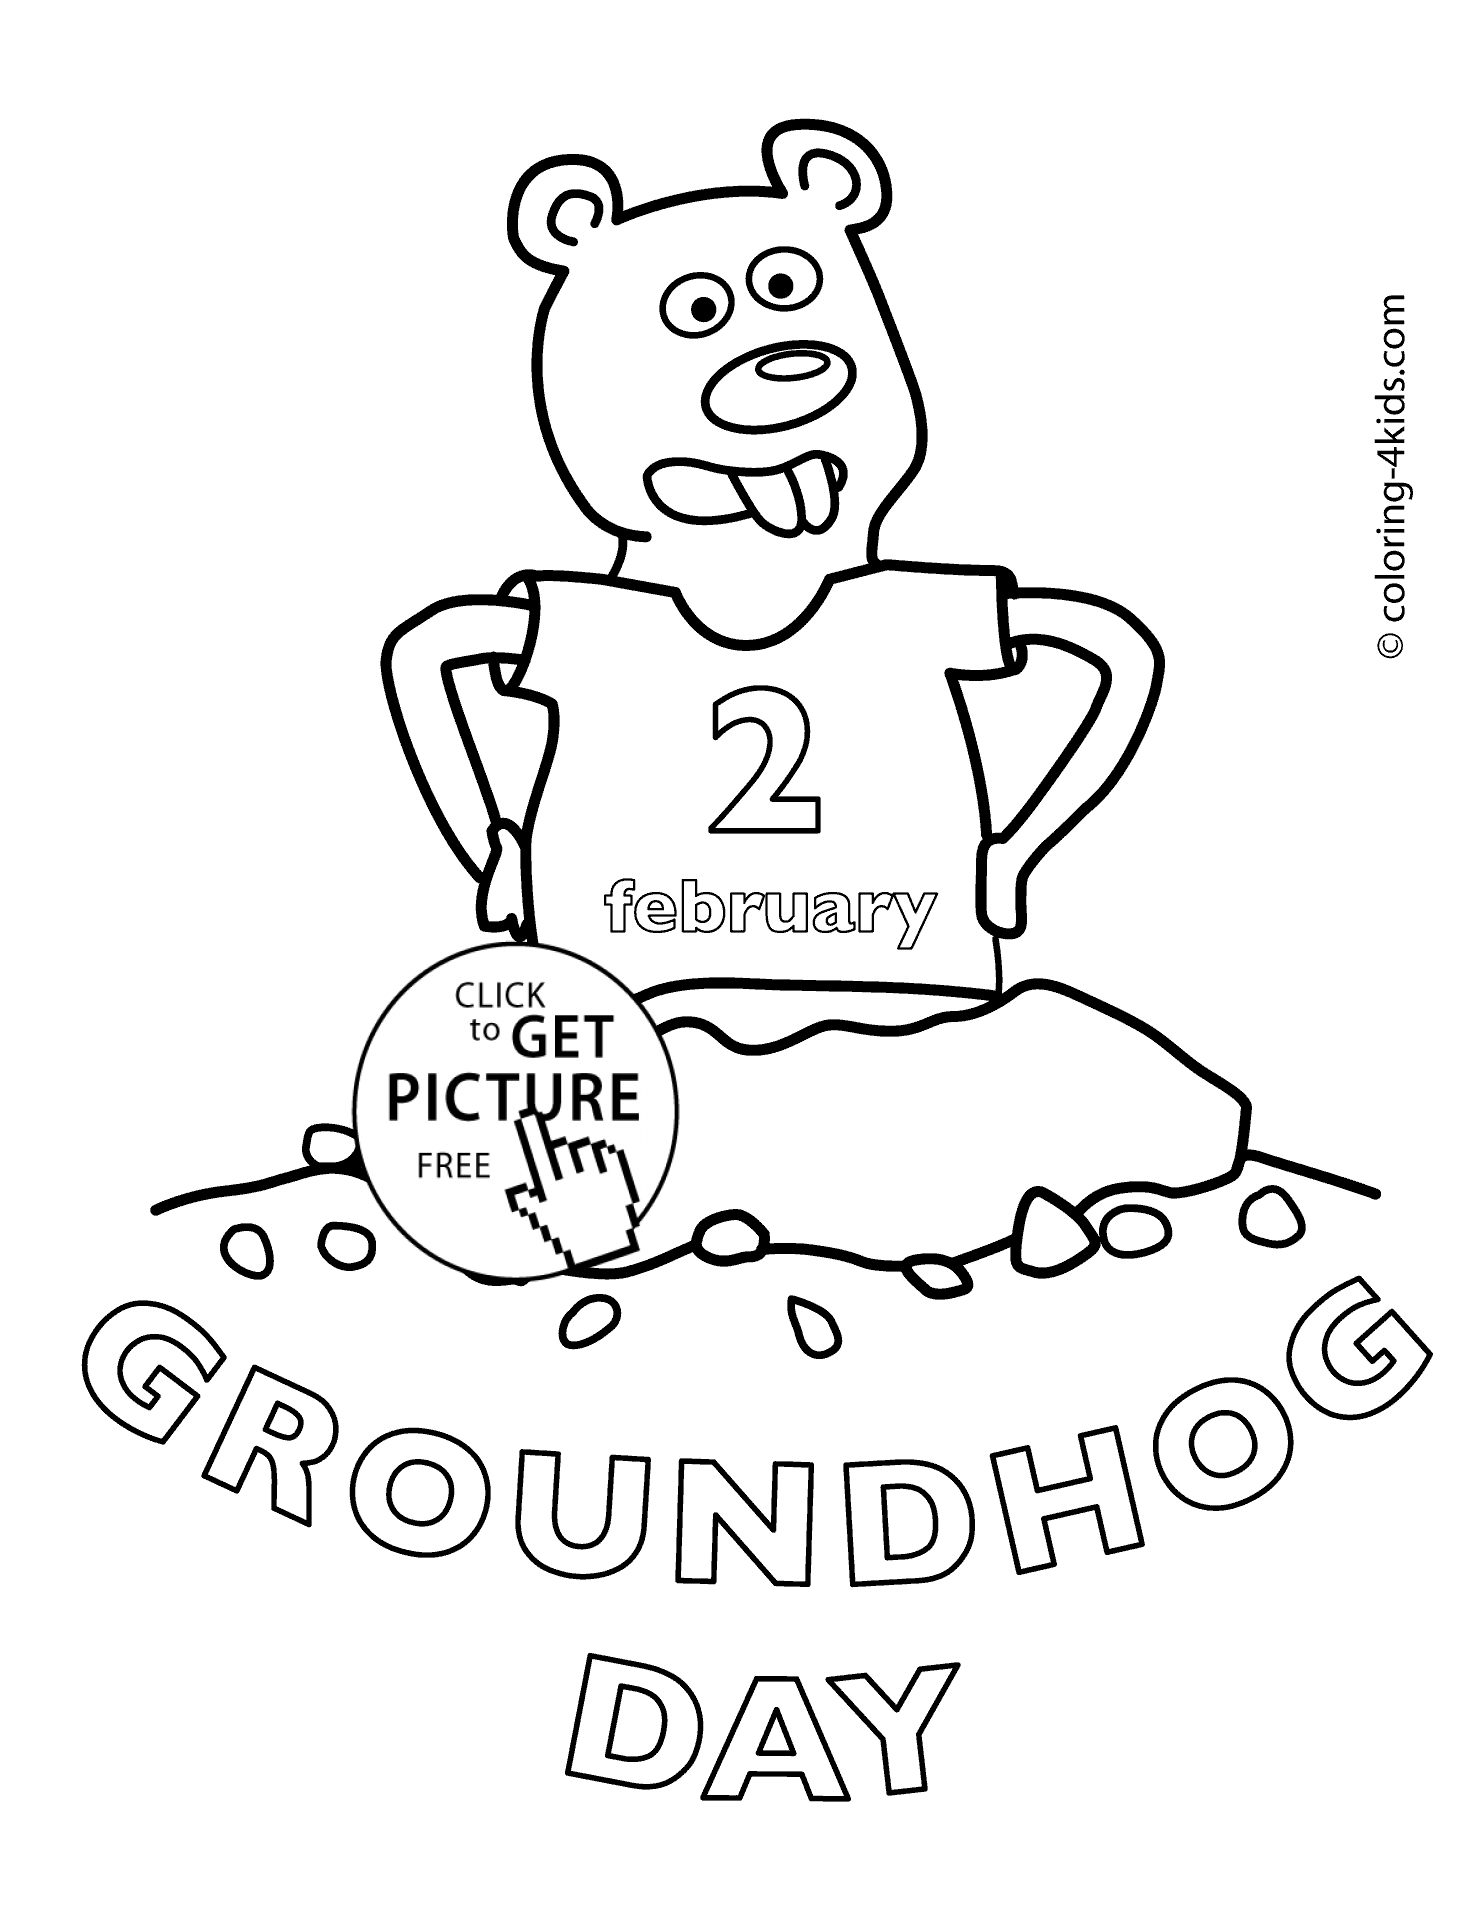 Groundhog Day Printable Coloring Pages Happy Groundhog Day Coloring Pages For Kids 2 February Printable